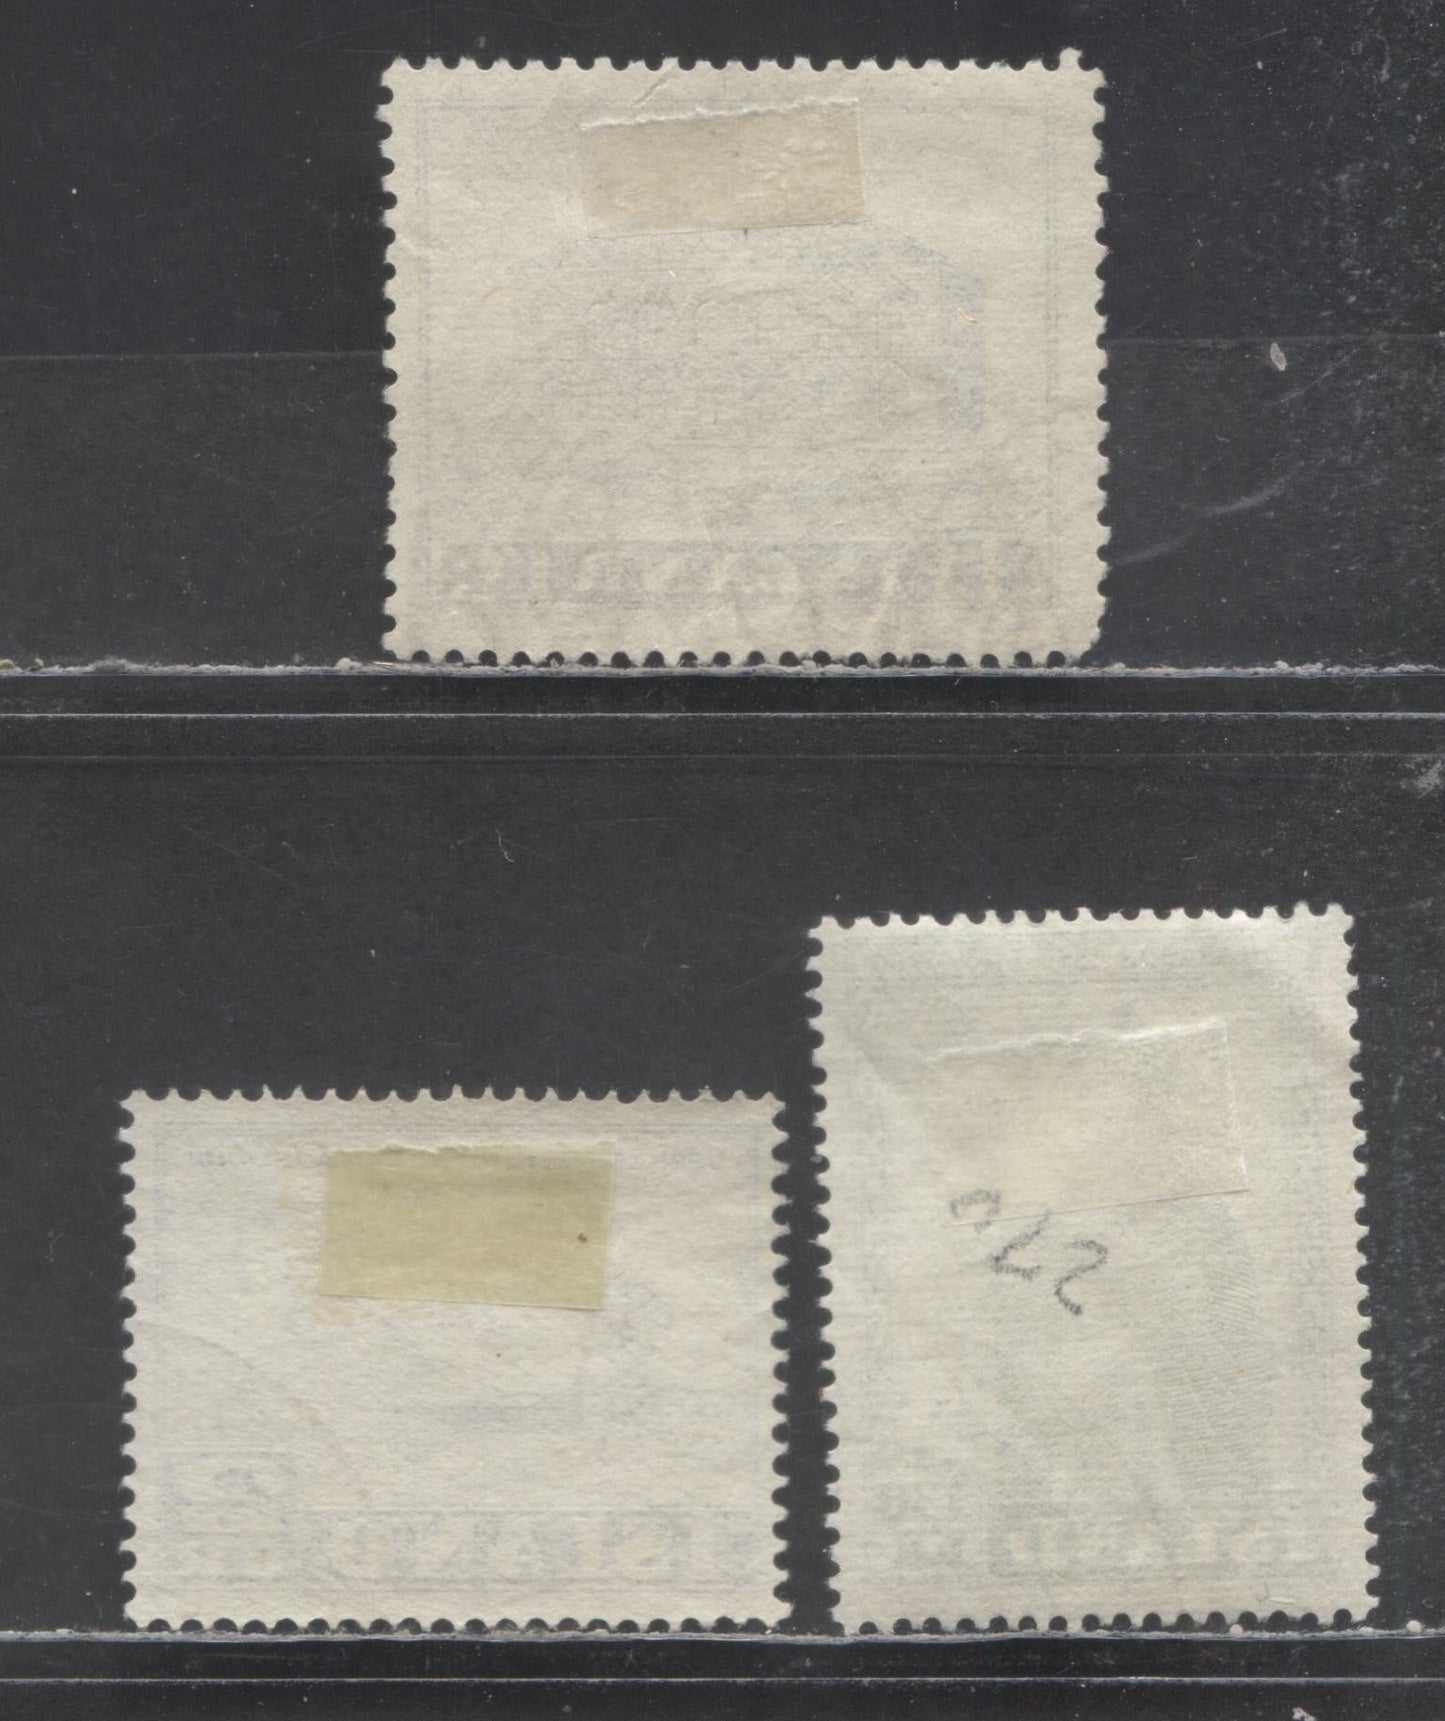 Lot 94 Iceland SC#270/273 1950-1952 Bishop Jon Arason - Parliamanet Building, 3 Very Fine Used Singles, Click on Listing to See ALL Pictures, Estimated Value $20